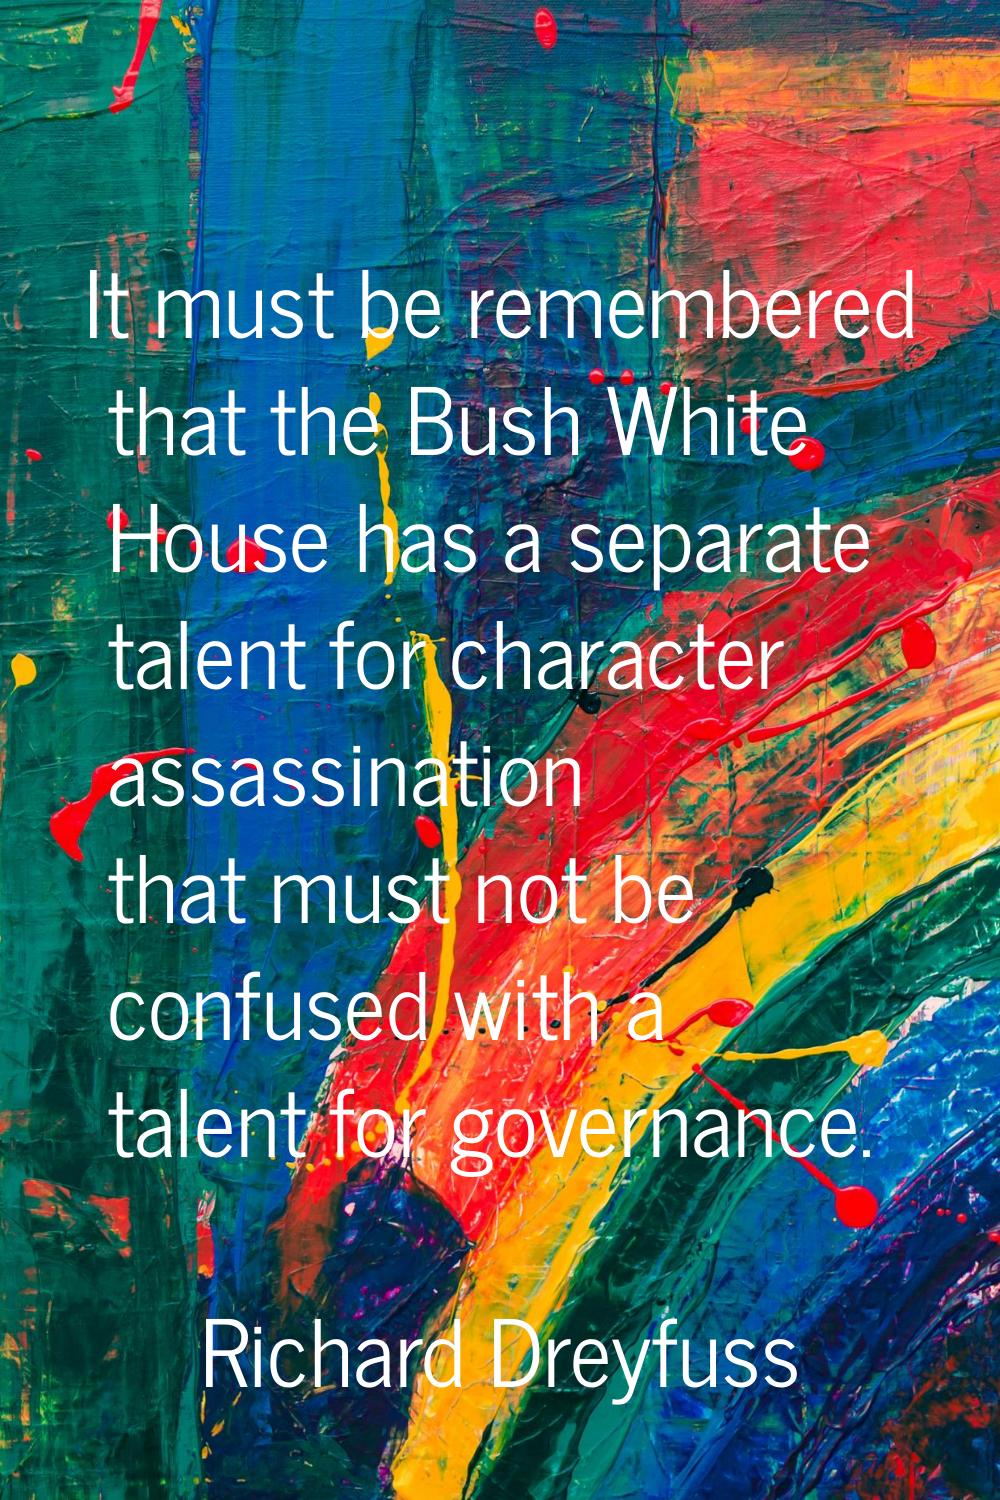 It must be remembered that the Bush White House has a separate talent for character assassination t